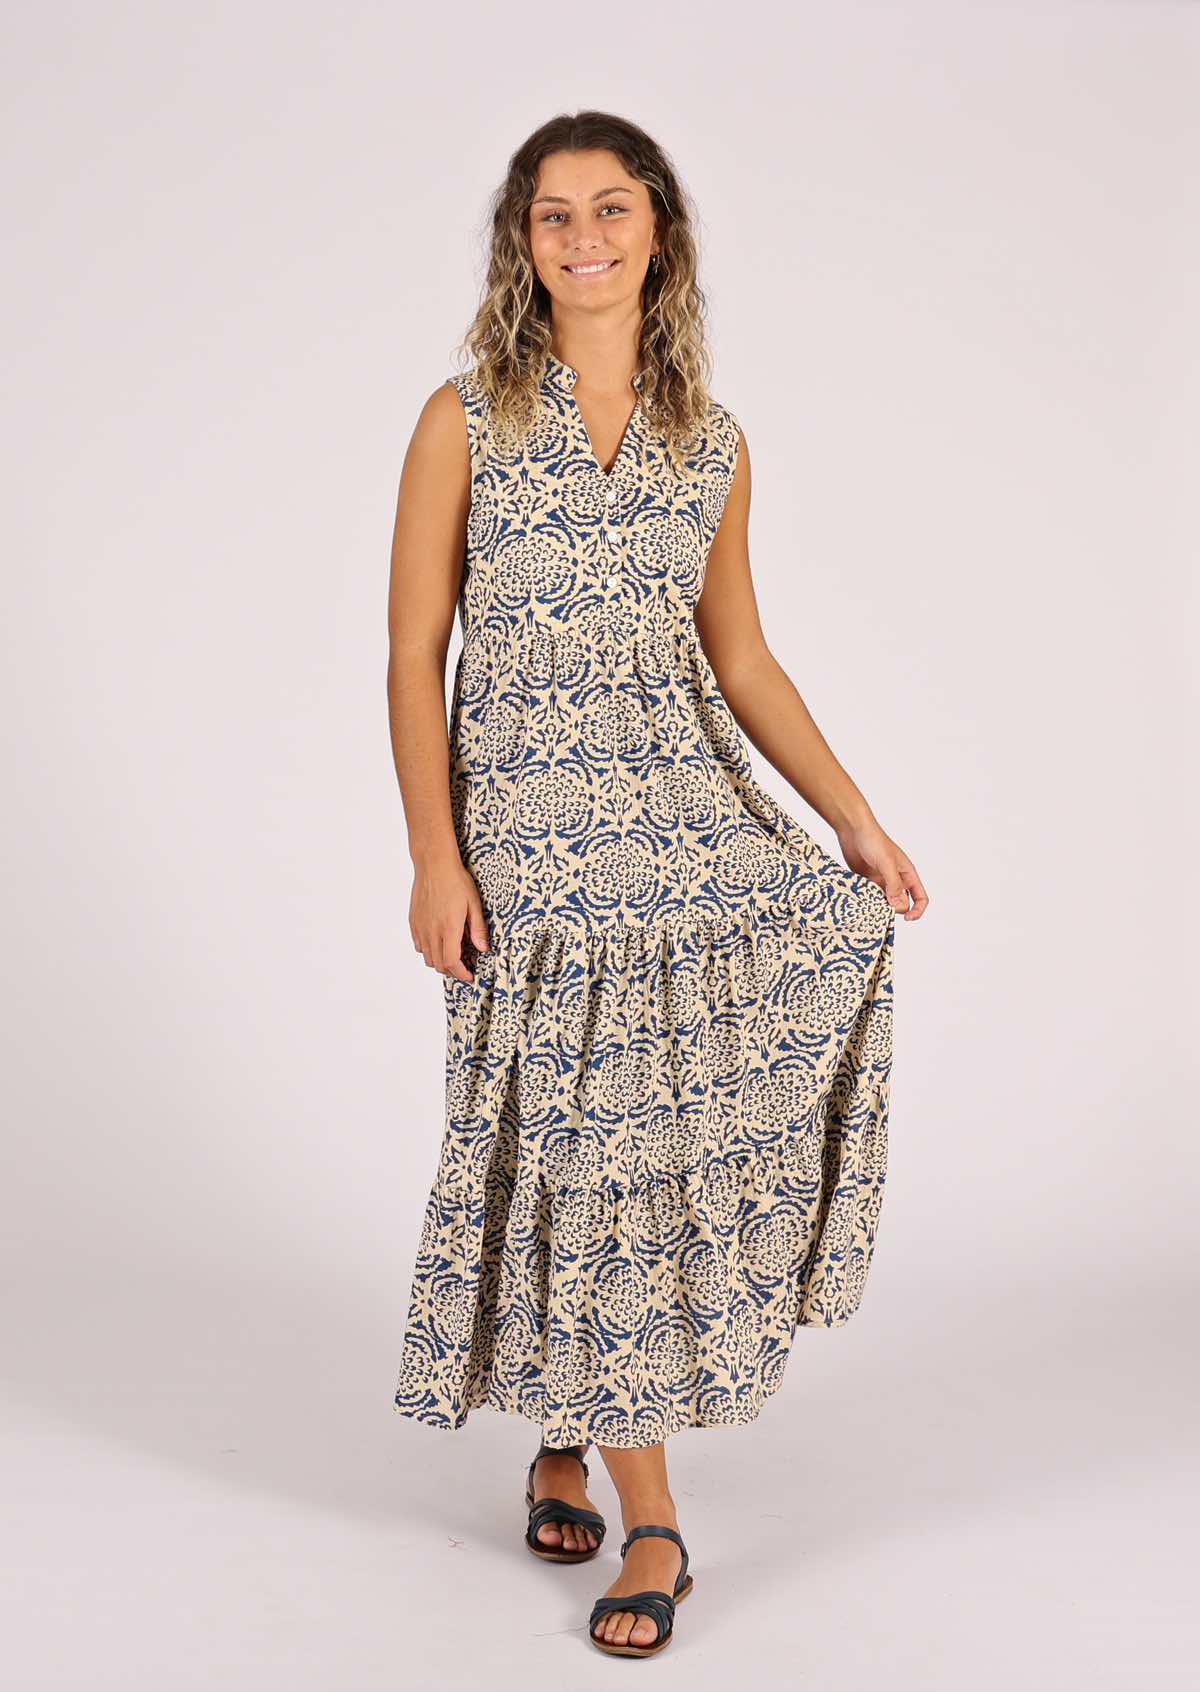 Model smiles in long cotton tiered dress with cream base